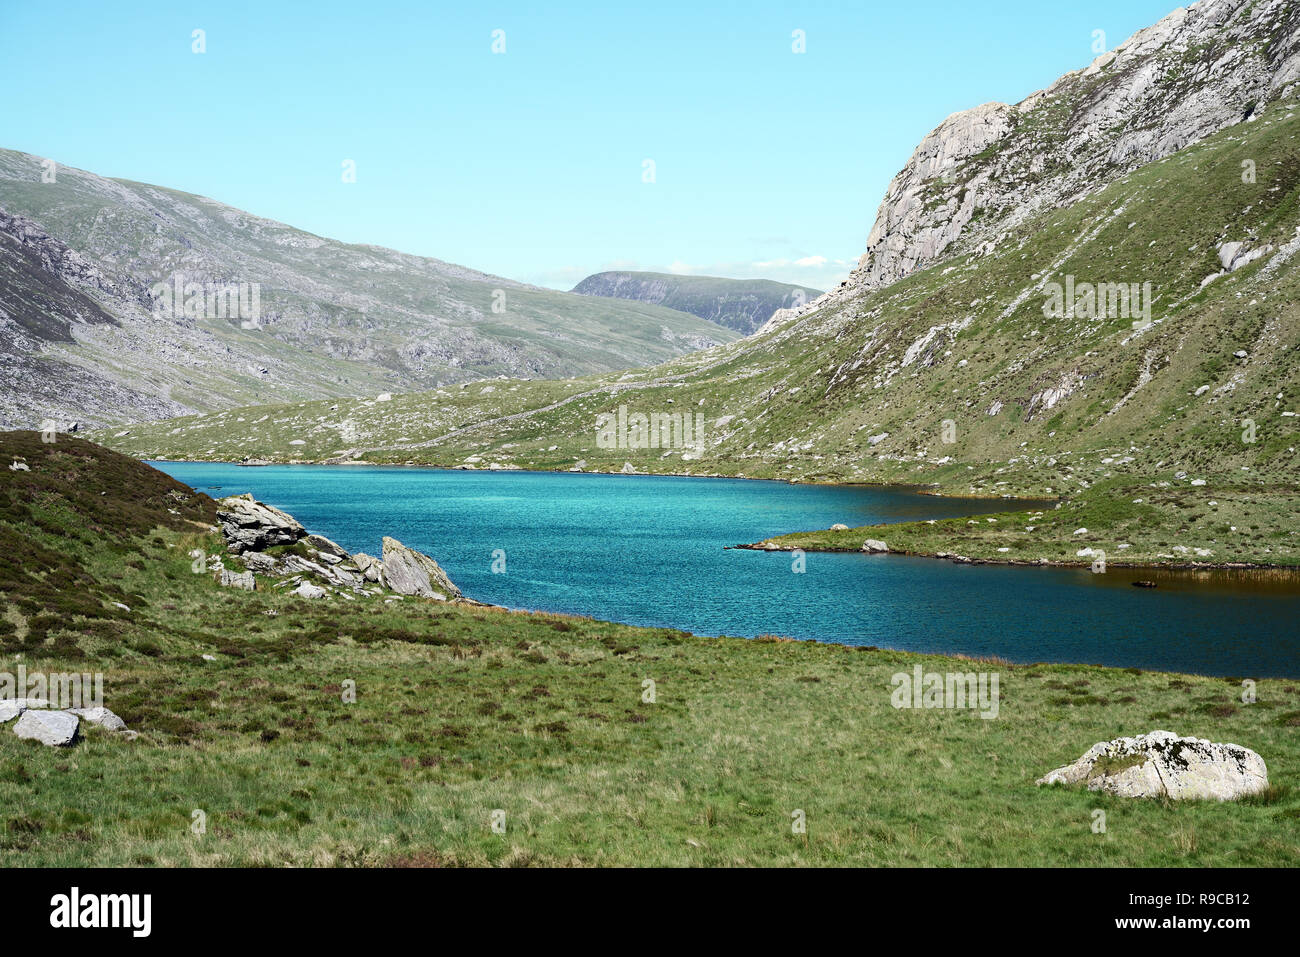 Cwm Idwal is a cirque (or corrie) in the Glyderau Range of the Snowdonia National Park. Here the green water of lake (Llyn Idwal) has been enhanced. Stock Photo